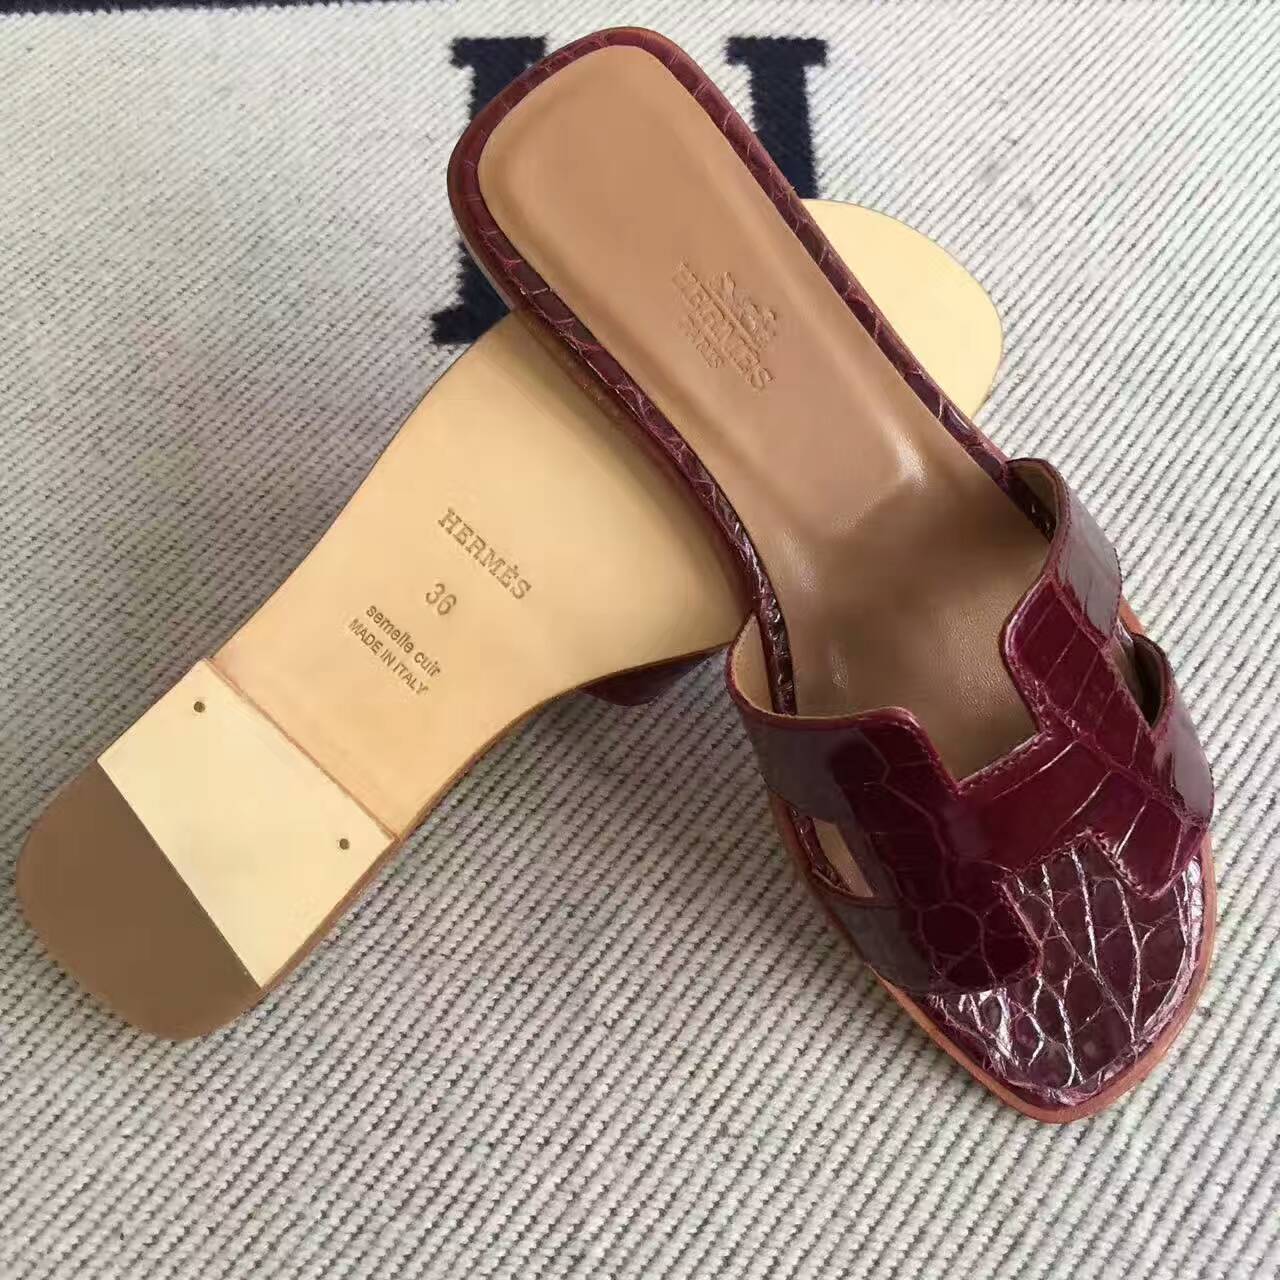 Hand Stitching Hermes Crocodile Leather Sandals Shoes in CK57 Bordeaux Size36